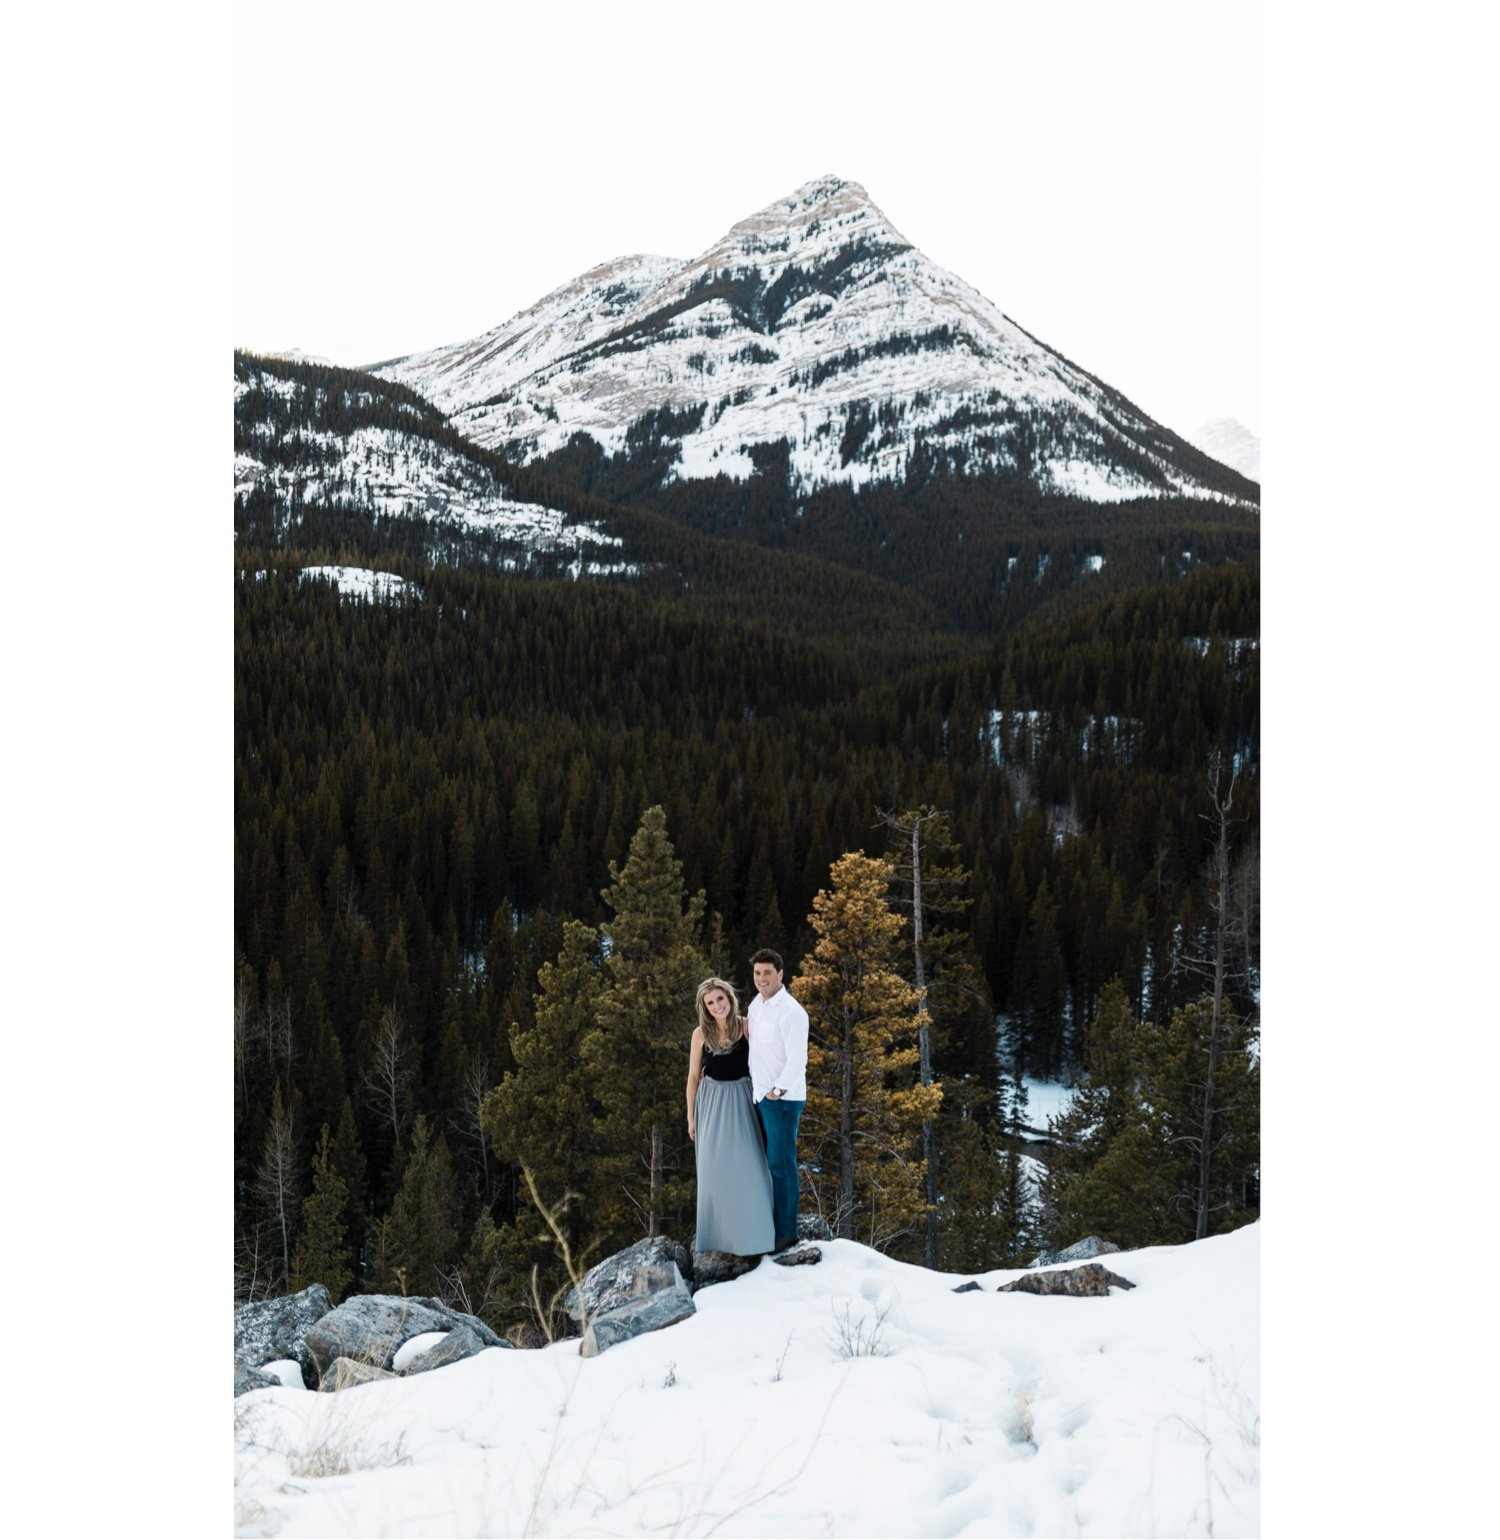 26_sunlight_landscape_Kananaskis_Canmore_Banff_trees_couple_engagement_close_simple_dog_cuddle_kiss_golden_hour_intimate_nature_mountains_fiancee_spring_winter_delicate_ice_bride_snow_soft_Calgary_Alberta_photographer_forest_groom_outdoor.jpg